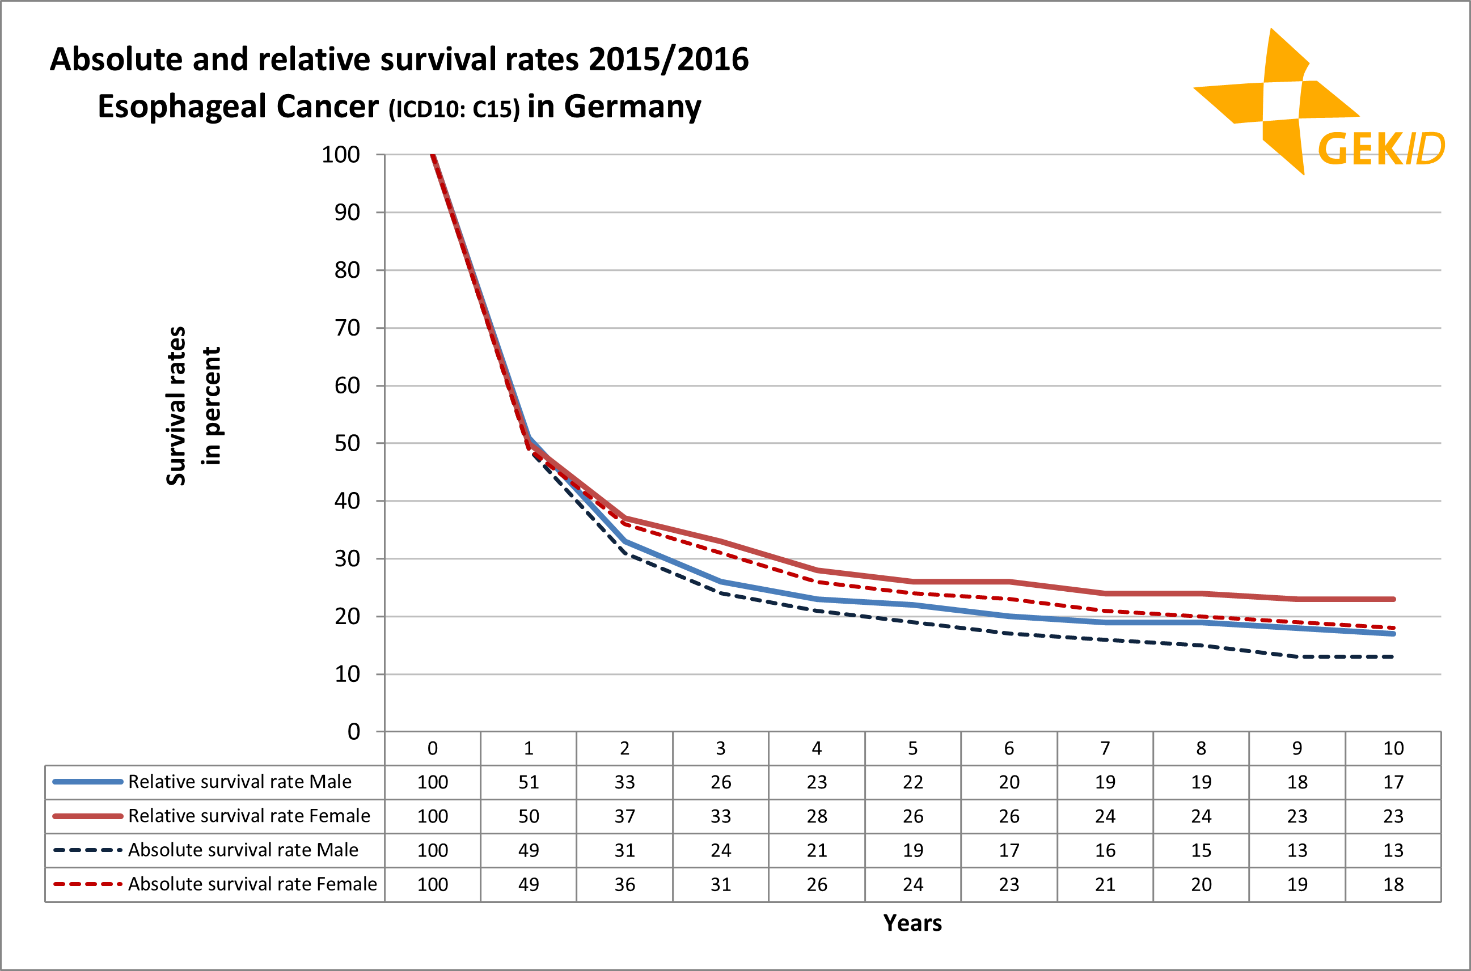 Absolute and relative survival rates in patients with esophageal cancer (ICD 10: C15)